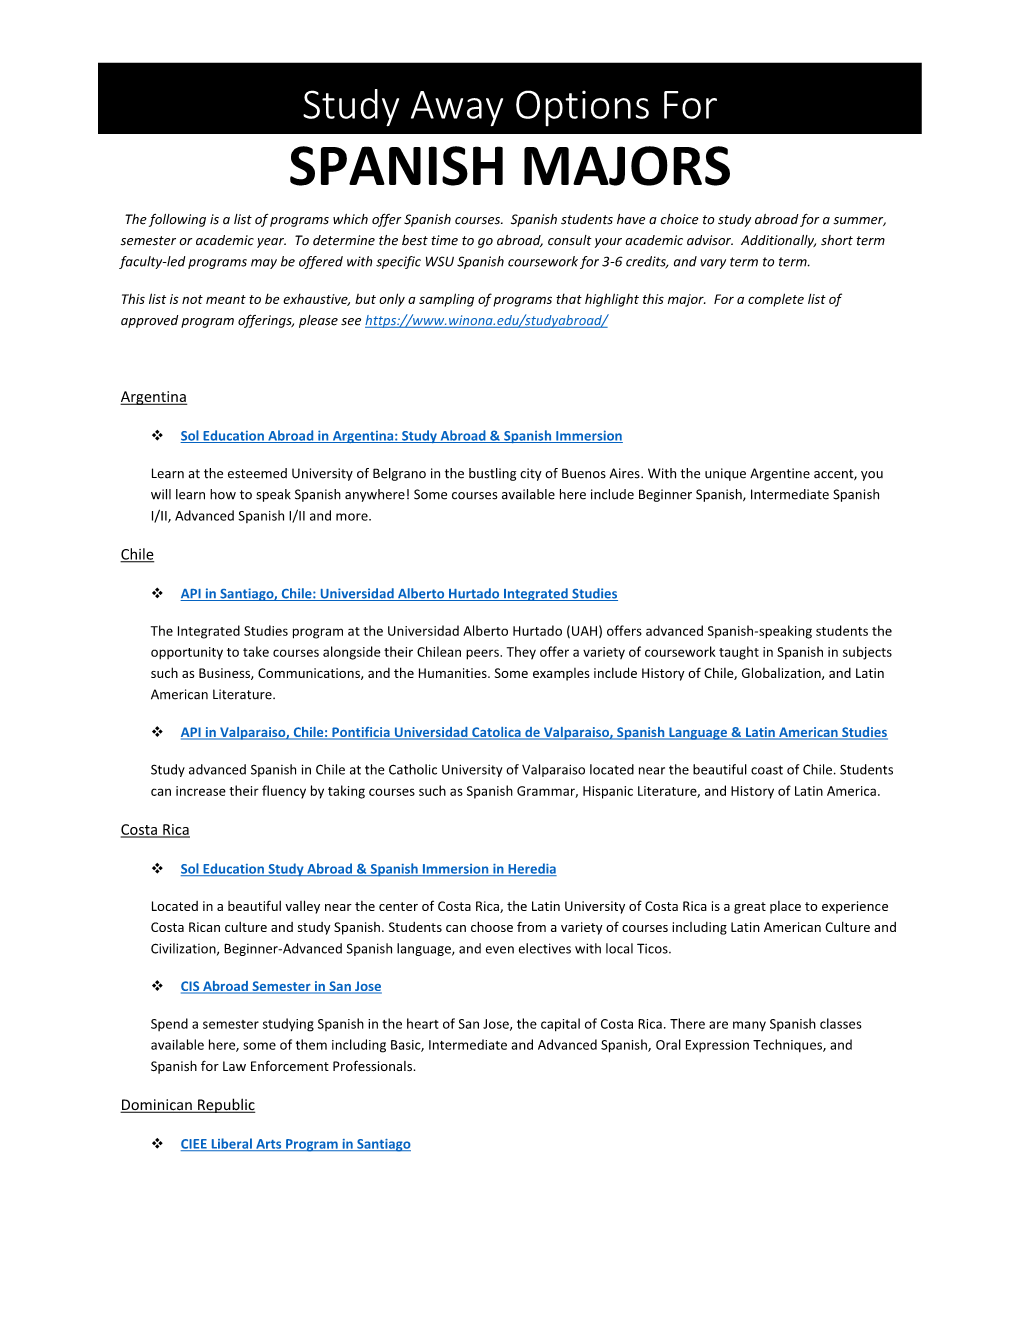 SPANISH MAJORS the Following Is a List of Programs Which Offer Spanish Courses